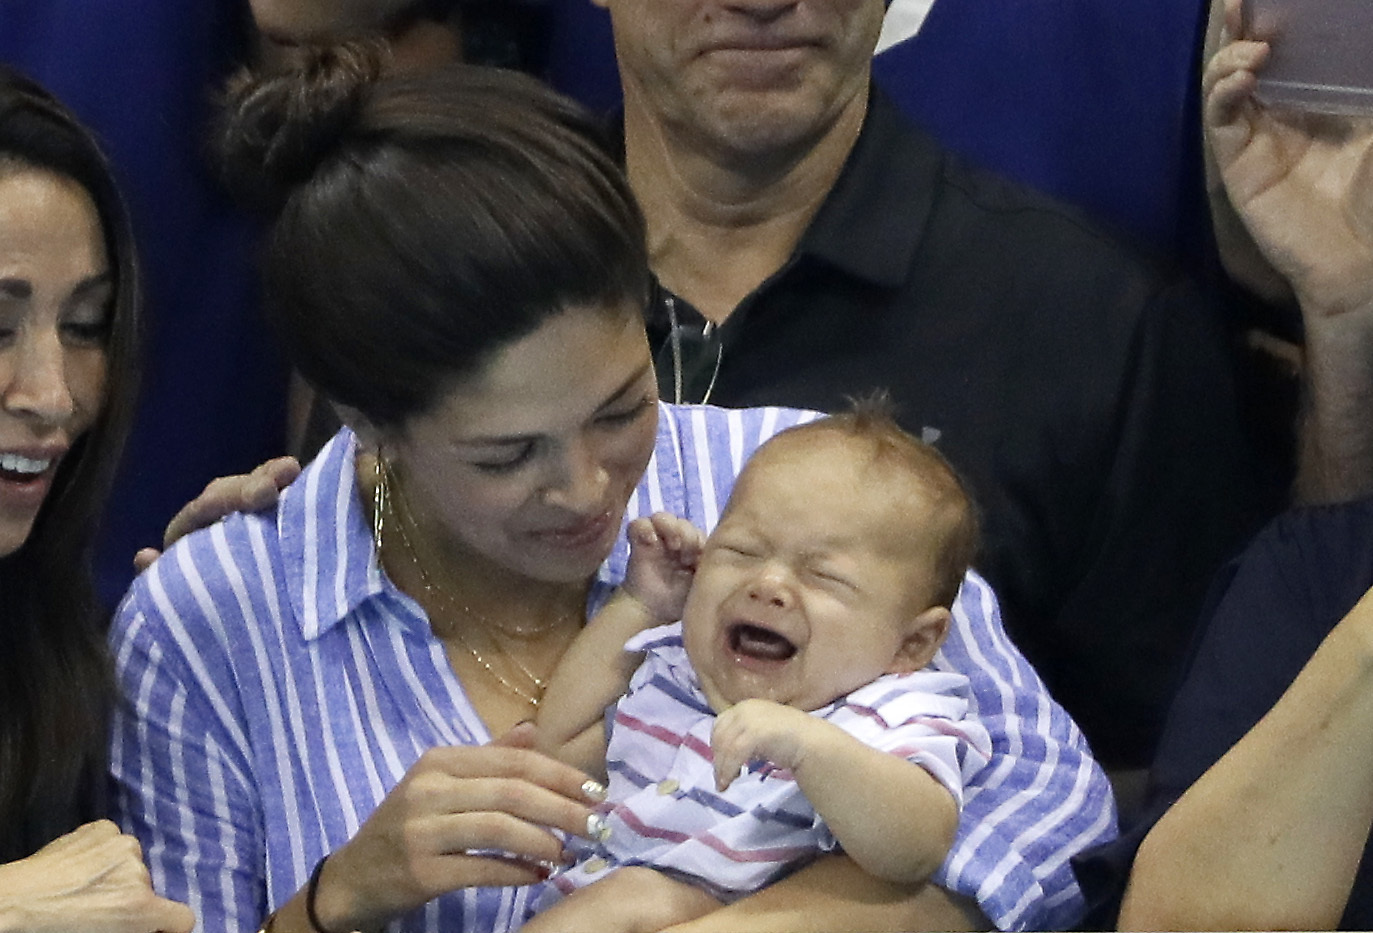 United States' Michael Phelps fiancee, Nicole Johnson, holds his baby son Boomer during the swimming competitions at the 2016 Summer Olympics, Wednesday, Aug. 10, 2016, in Rio de Janeiro, Brazil. (AP Photo/David J. Phillip )